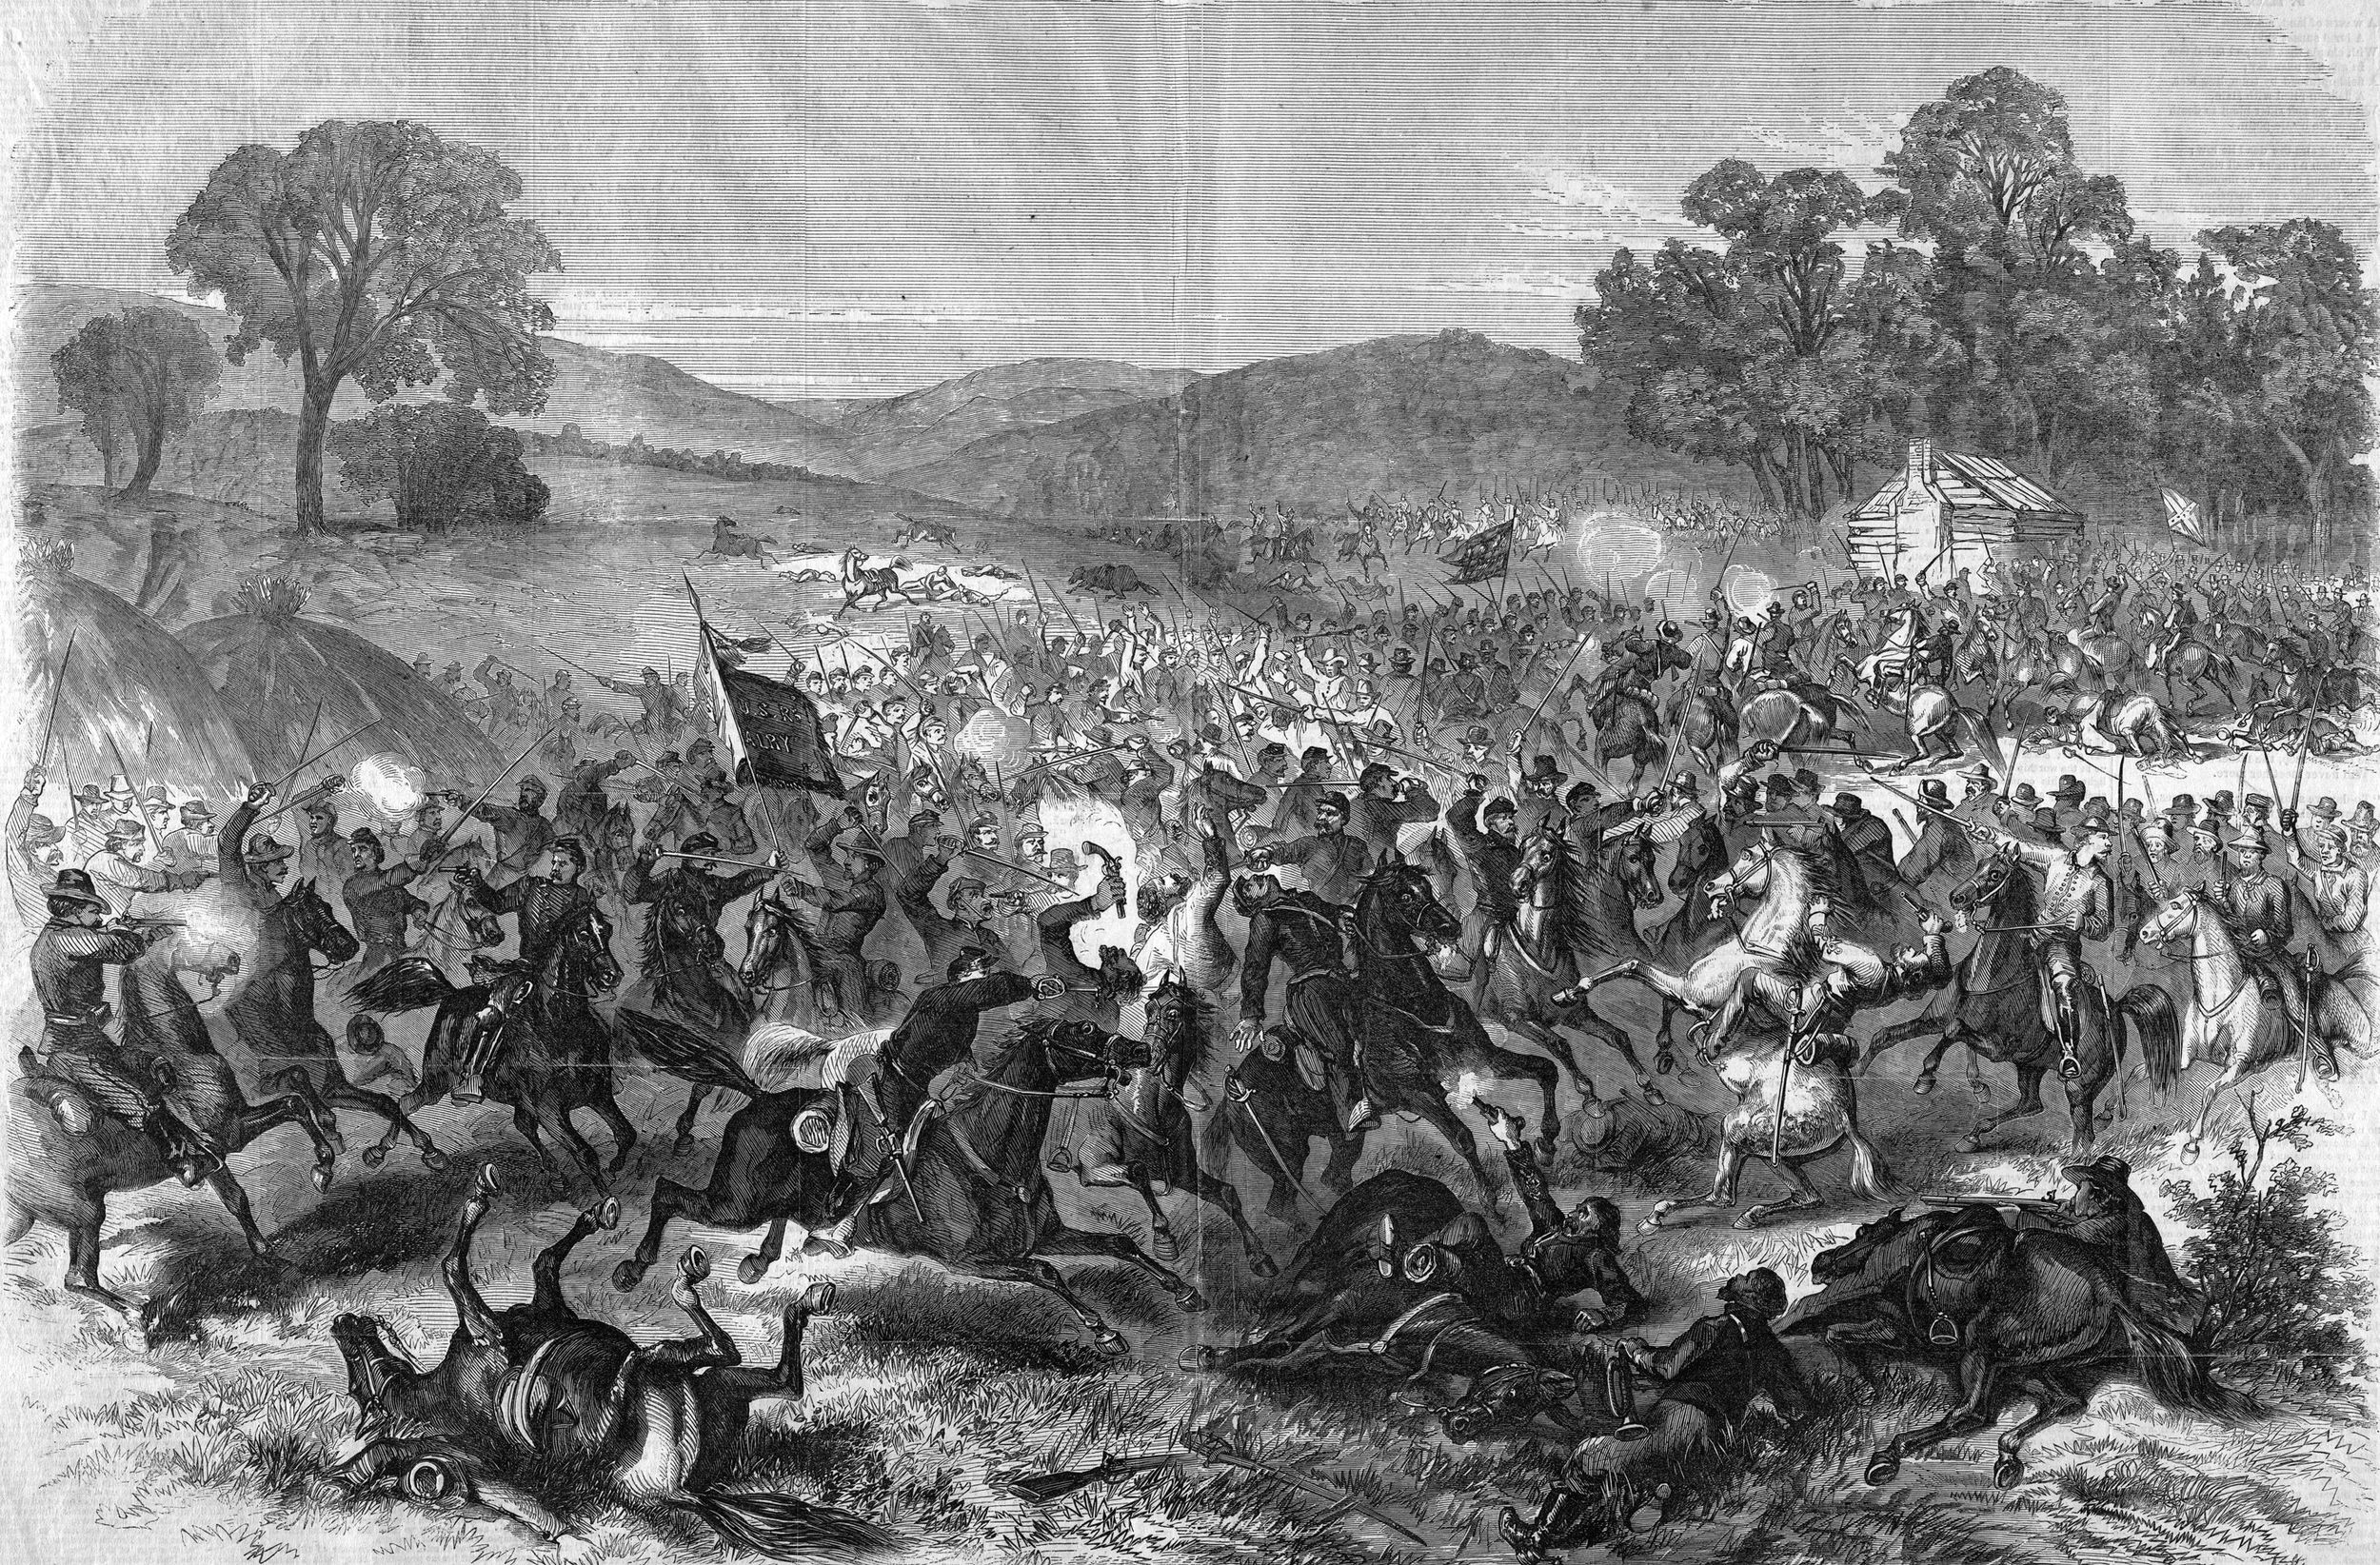 Union Brigadier General John Buford fought a follow-up battle with Stuart’s cavalry at Boonsboro, five days after Gettysburg. From Frank Leslie’s Illustrated Newspaper.